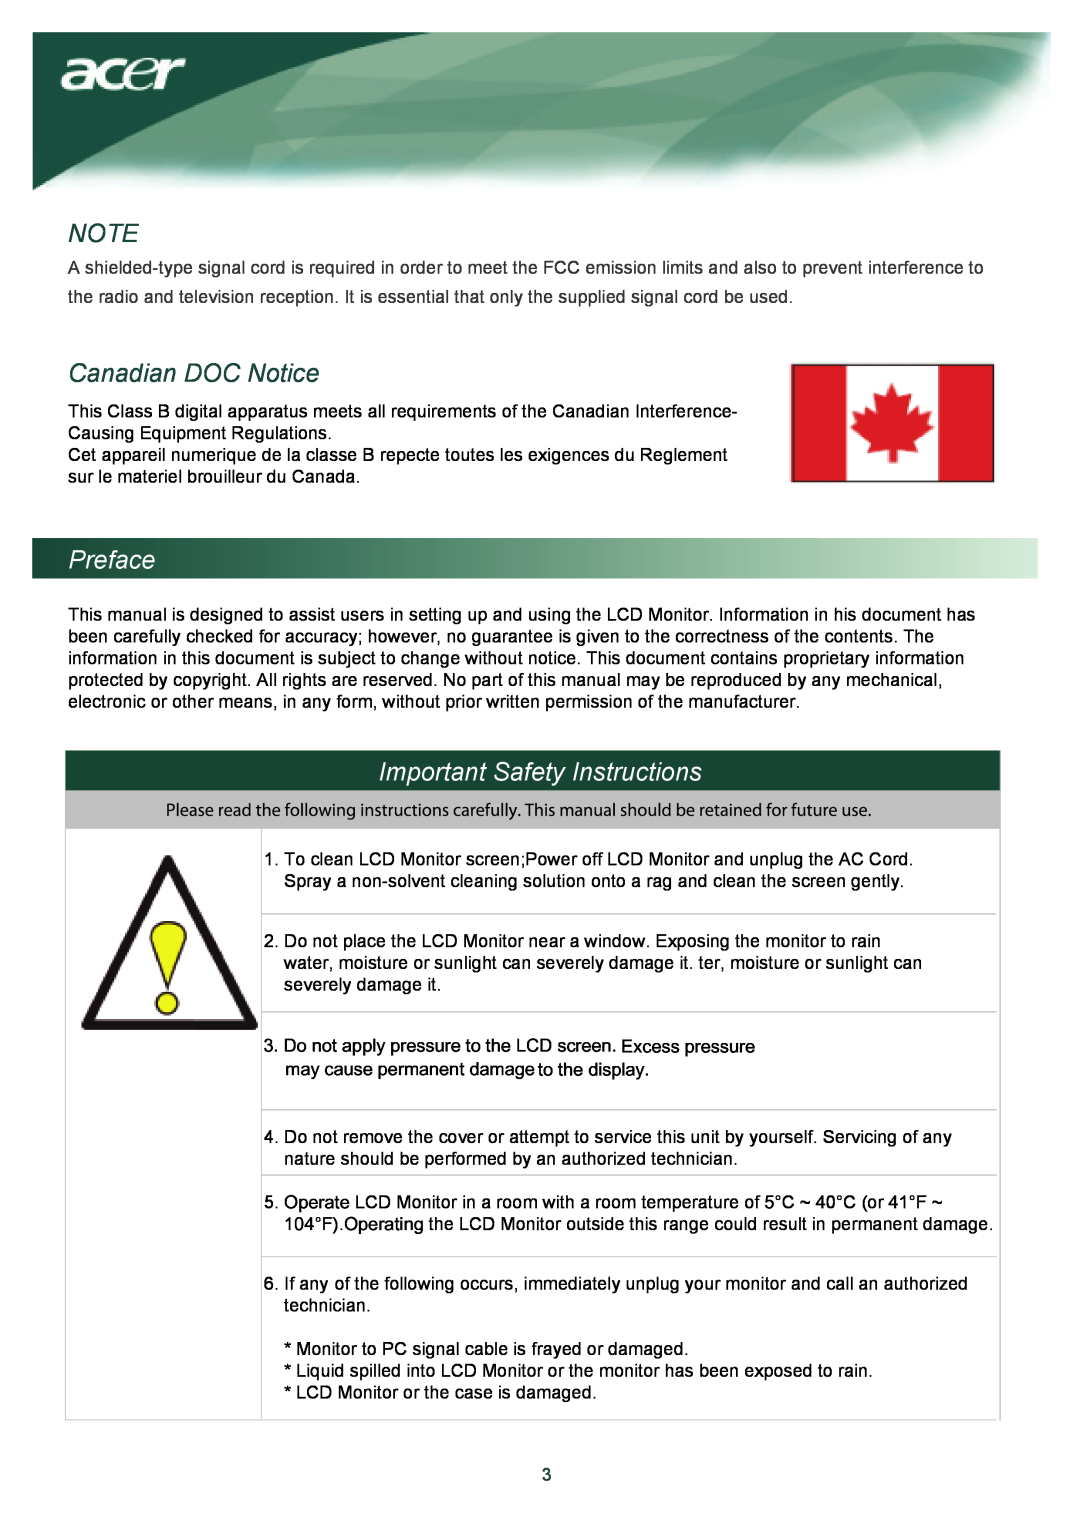 Acer TCO03 installation instructions Canadian DOC Notice, Preface, Important Safety Instructions 